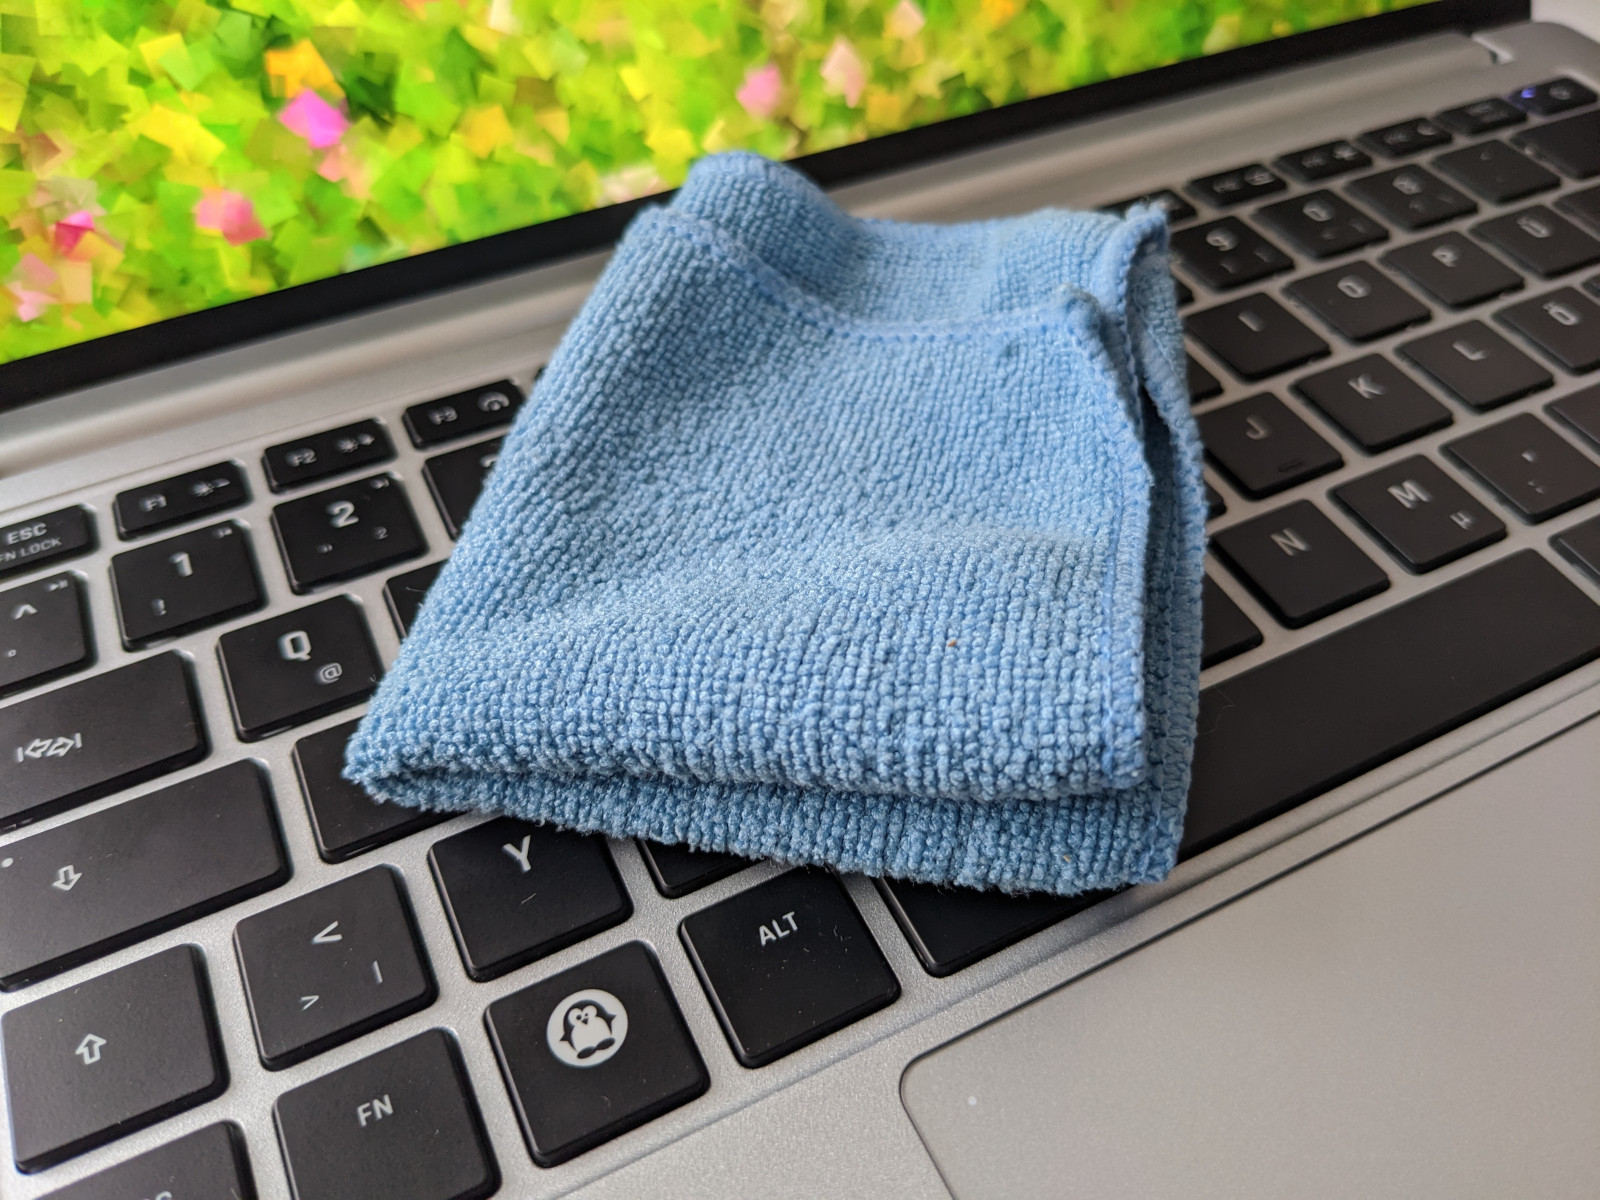 Make sure the cloth is not dripping wet, just slightly damp.
If using rubbing alcohol, ensure it is a small amount and not directly applied to the touchpad.